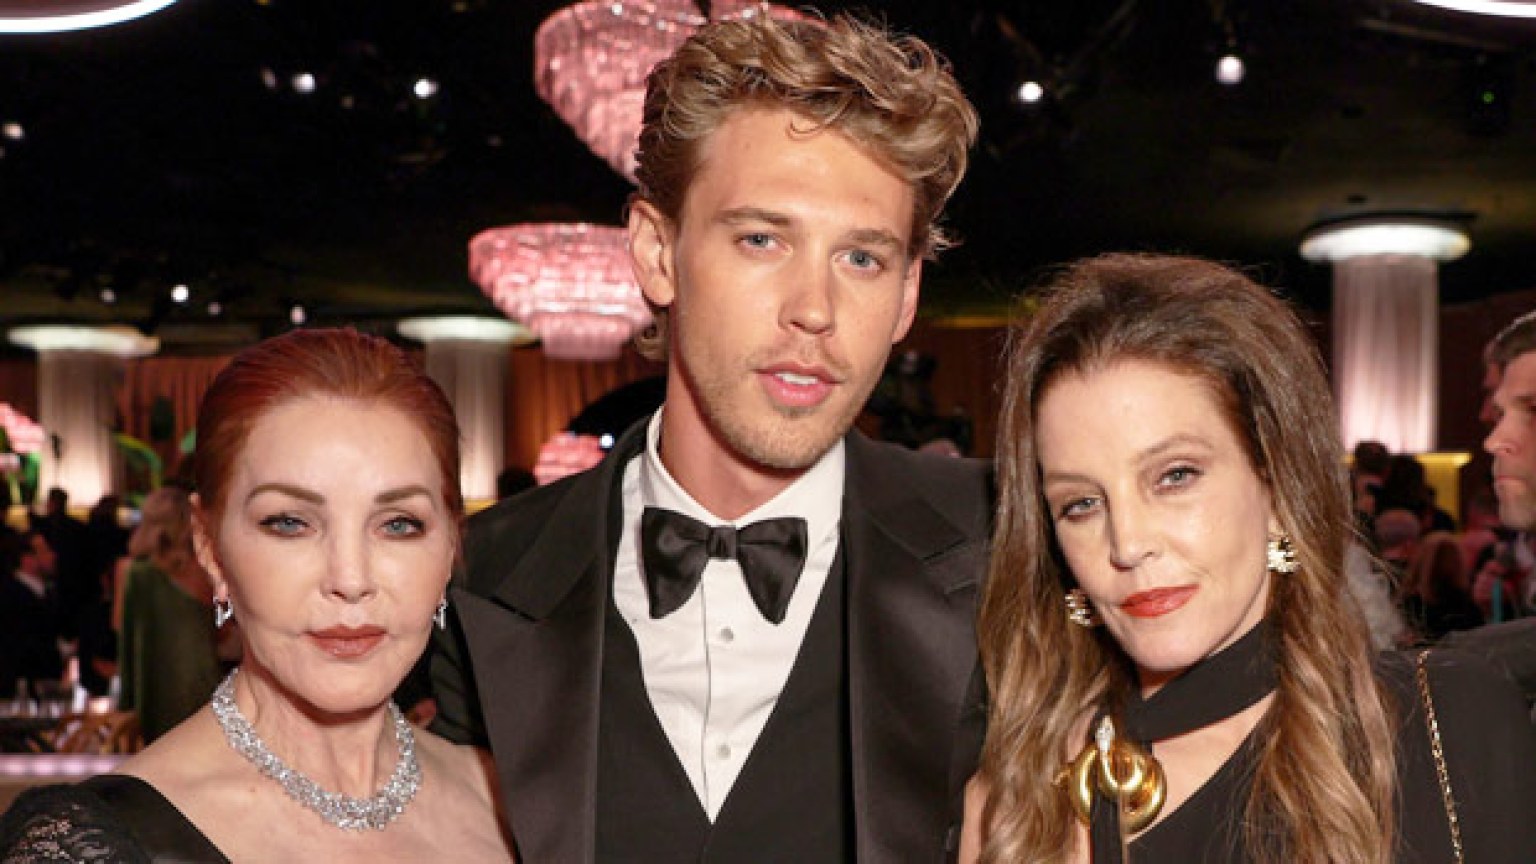 Lisa Marie Presley Appeared Unsteady At Golden Globes Days Before Death